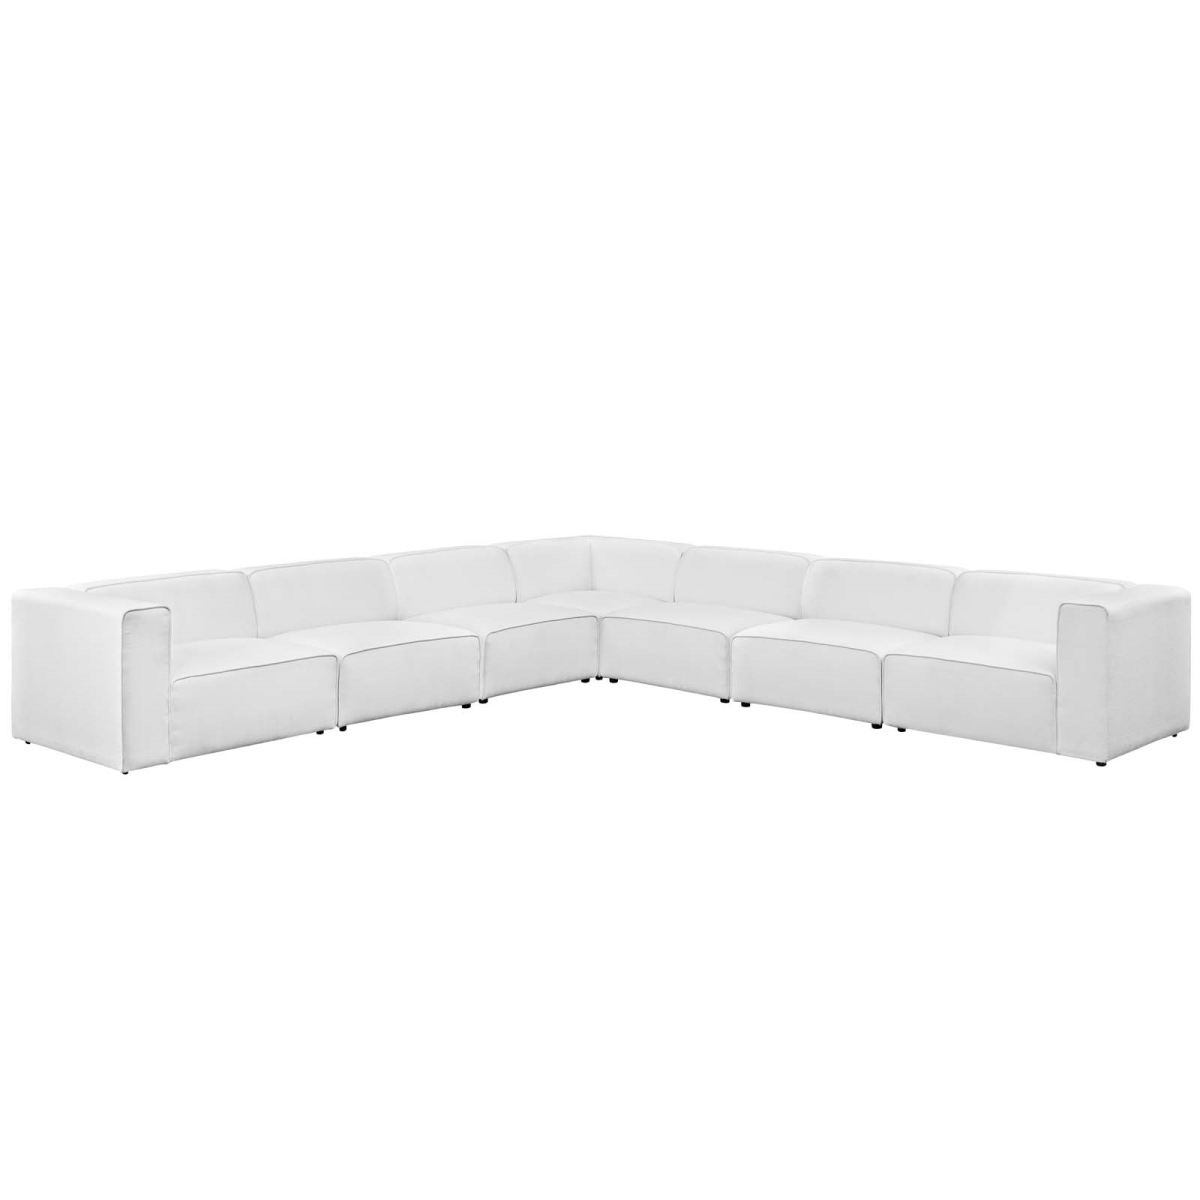 Eei-2837-whi 7 Piece Mingle Upholstered Fabric Sectional Sofa Set - White, 27 X 149.5 X 149.5 In.